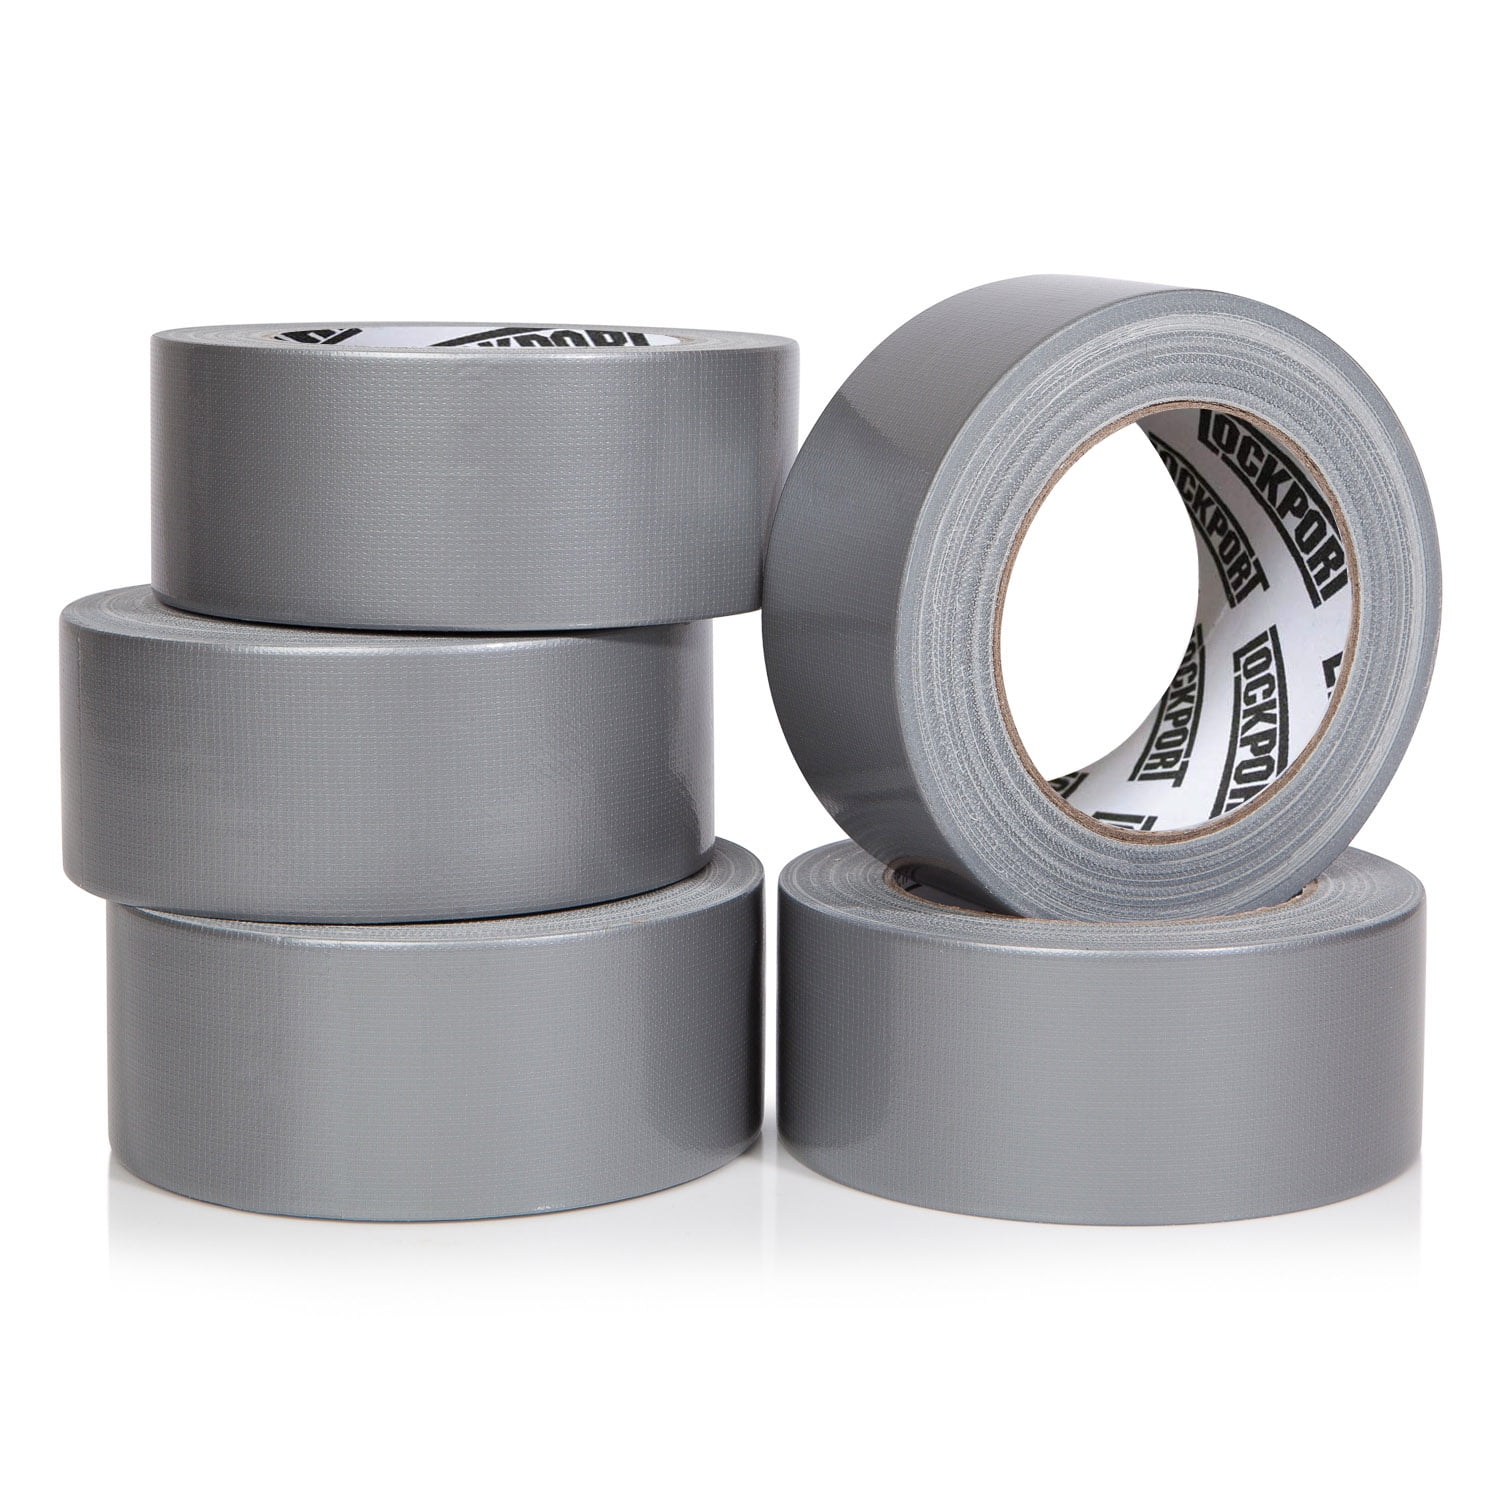 Duct Tape Heavy Duty Roll Multi Pack Silver 90 Feet x Inch Strong,  Flexible, No Residue, All-Weather and Tear by Hand Bulk Value for  Do-It-Yourself Repairs,